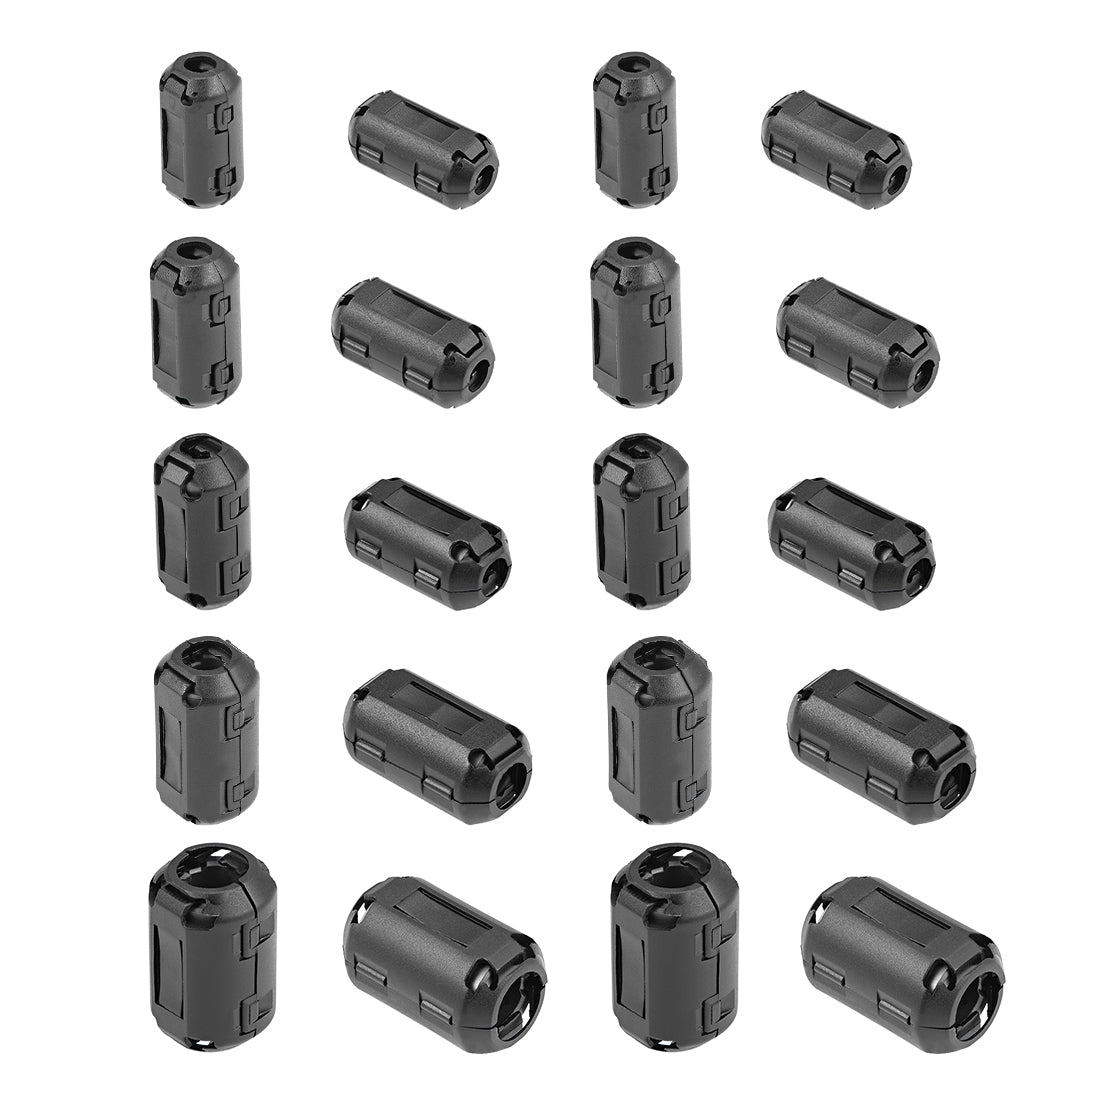 uxcell Uxcell Ferrite Cores Ring 3.5mm 5mm 7mm 9mm 13mm RFI EMI Noise Cable Clip Black 20pcs